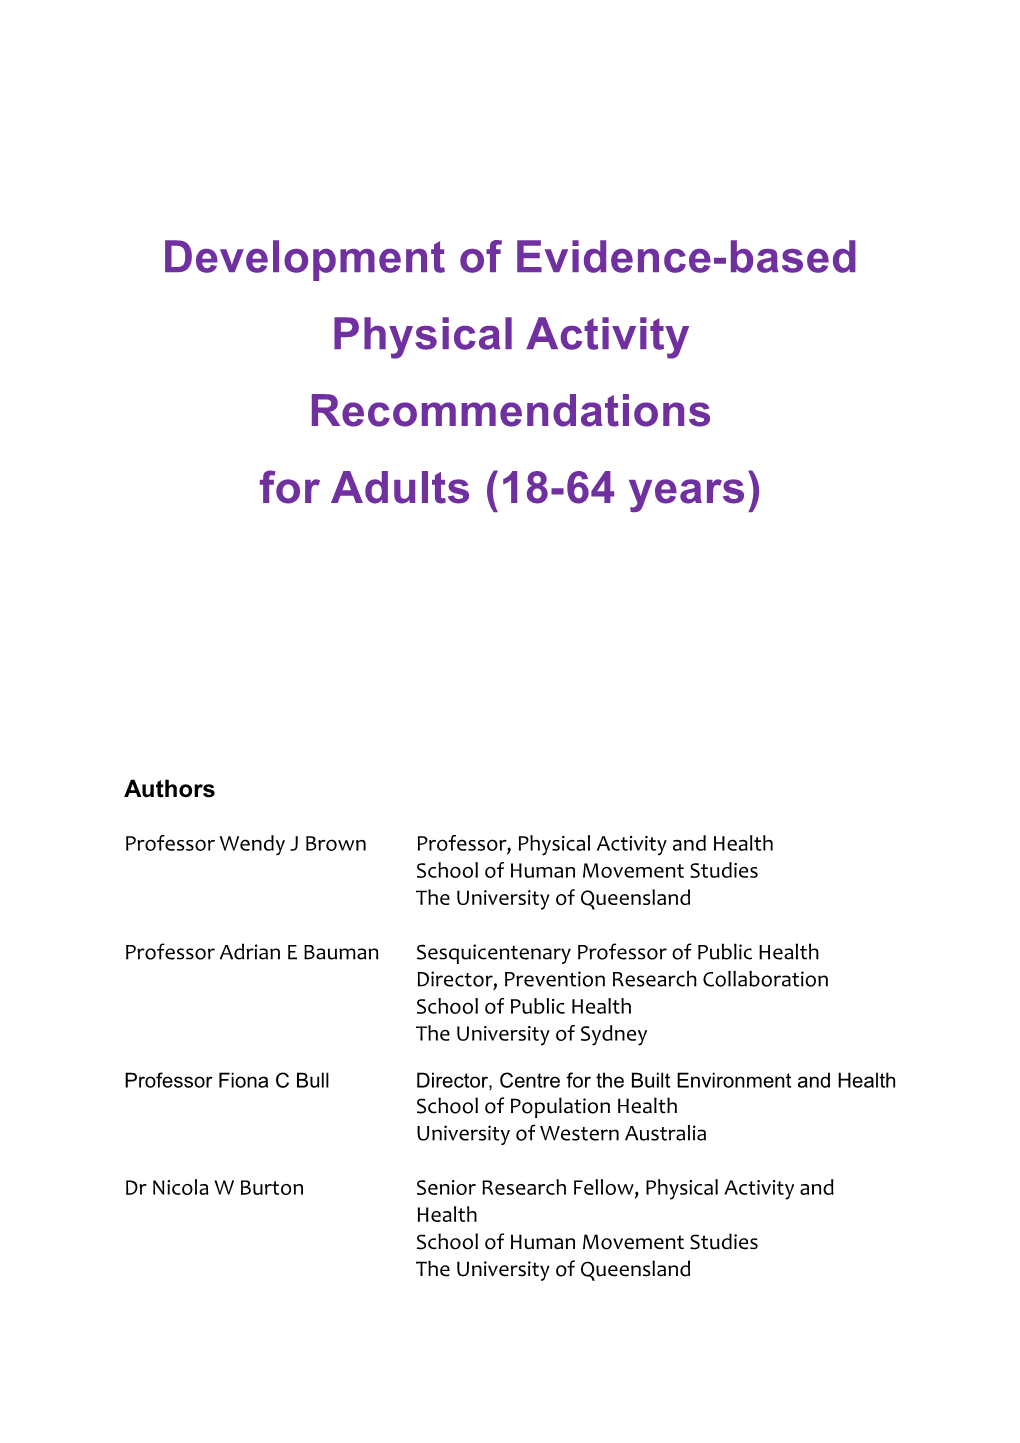 Development of Evidence-Based Physical Activity Recommendations for Adults (18-64 Years)